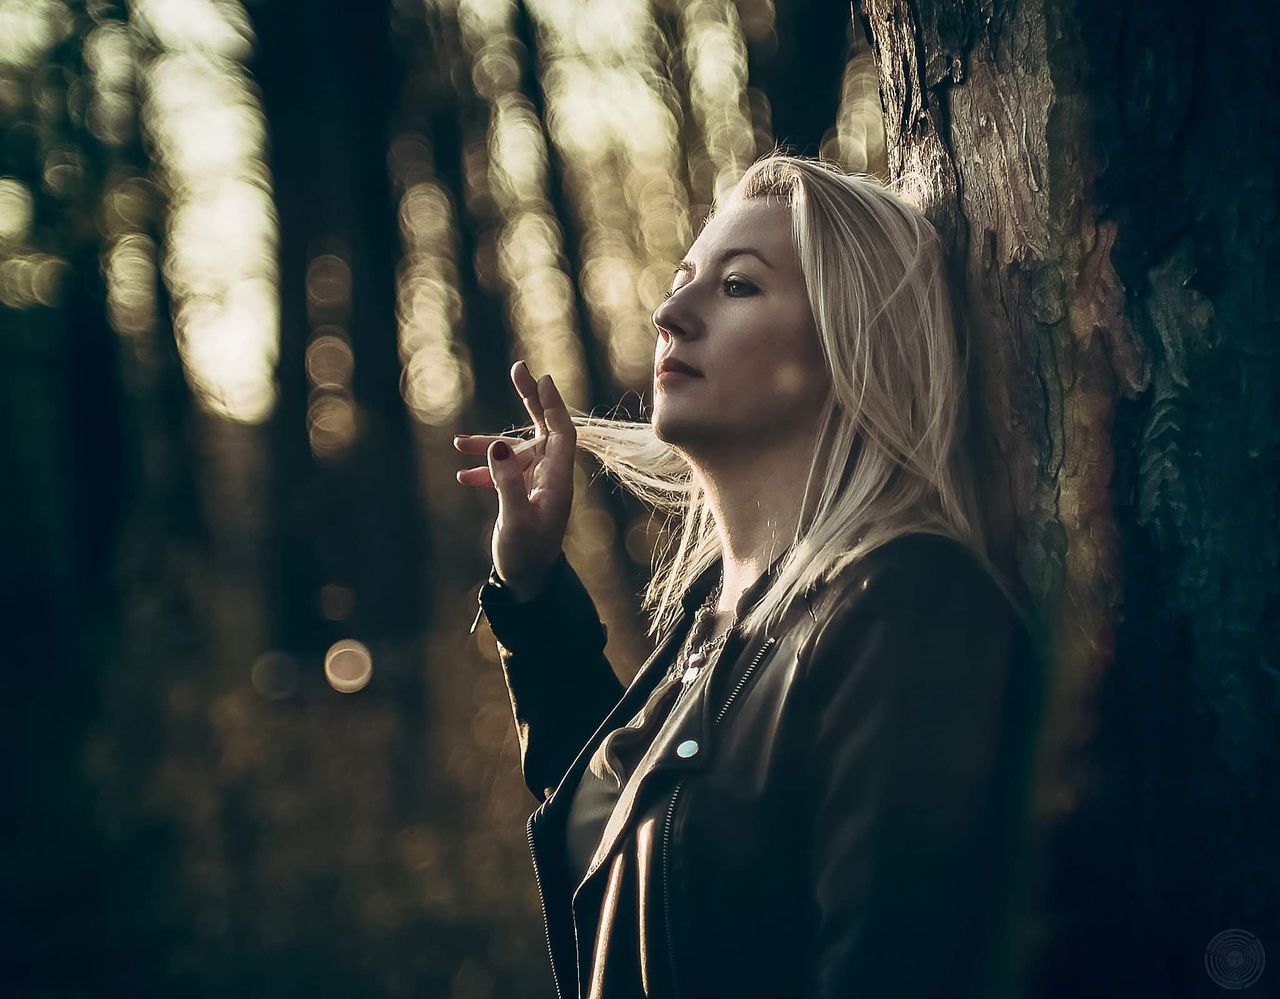 darkness, one person, women, adult, tree, young adult, nature, forest, blond hair, portrait, lifestyles, plant, light, female, smoking, land, leisure activity, hairstyle, outdoors, long hair, looking, contemplation, person, sunlight, social issues, activity, emotion, waist up, smoking issues, side view